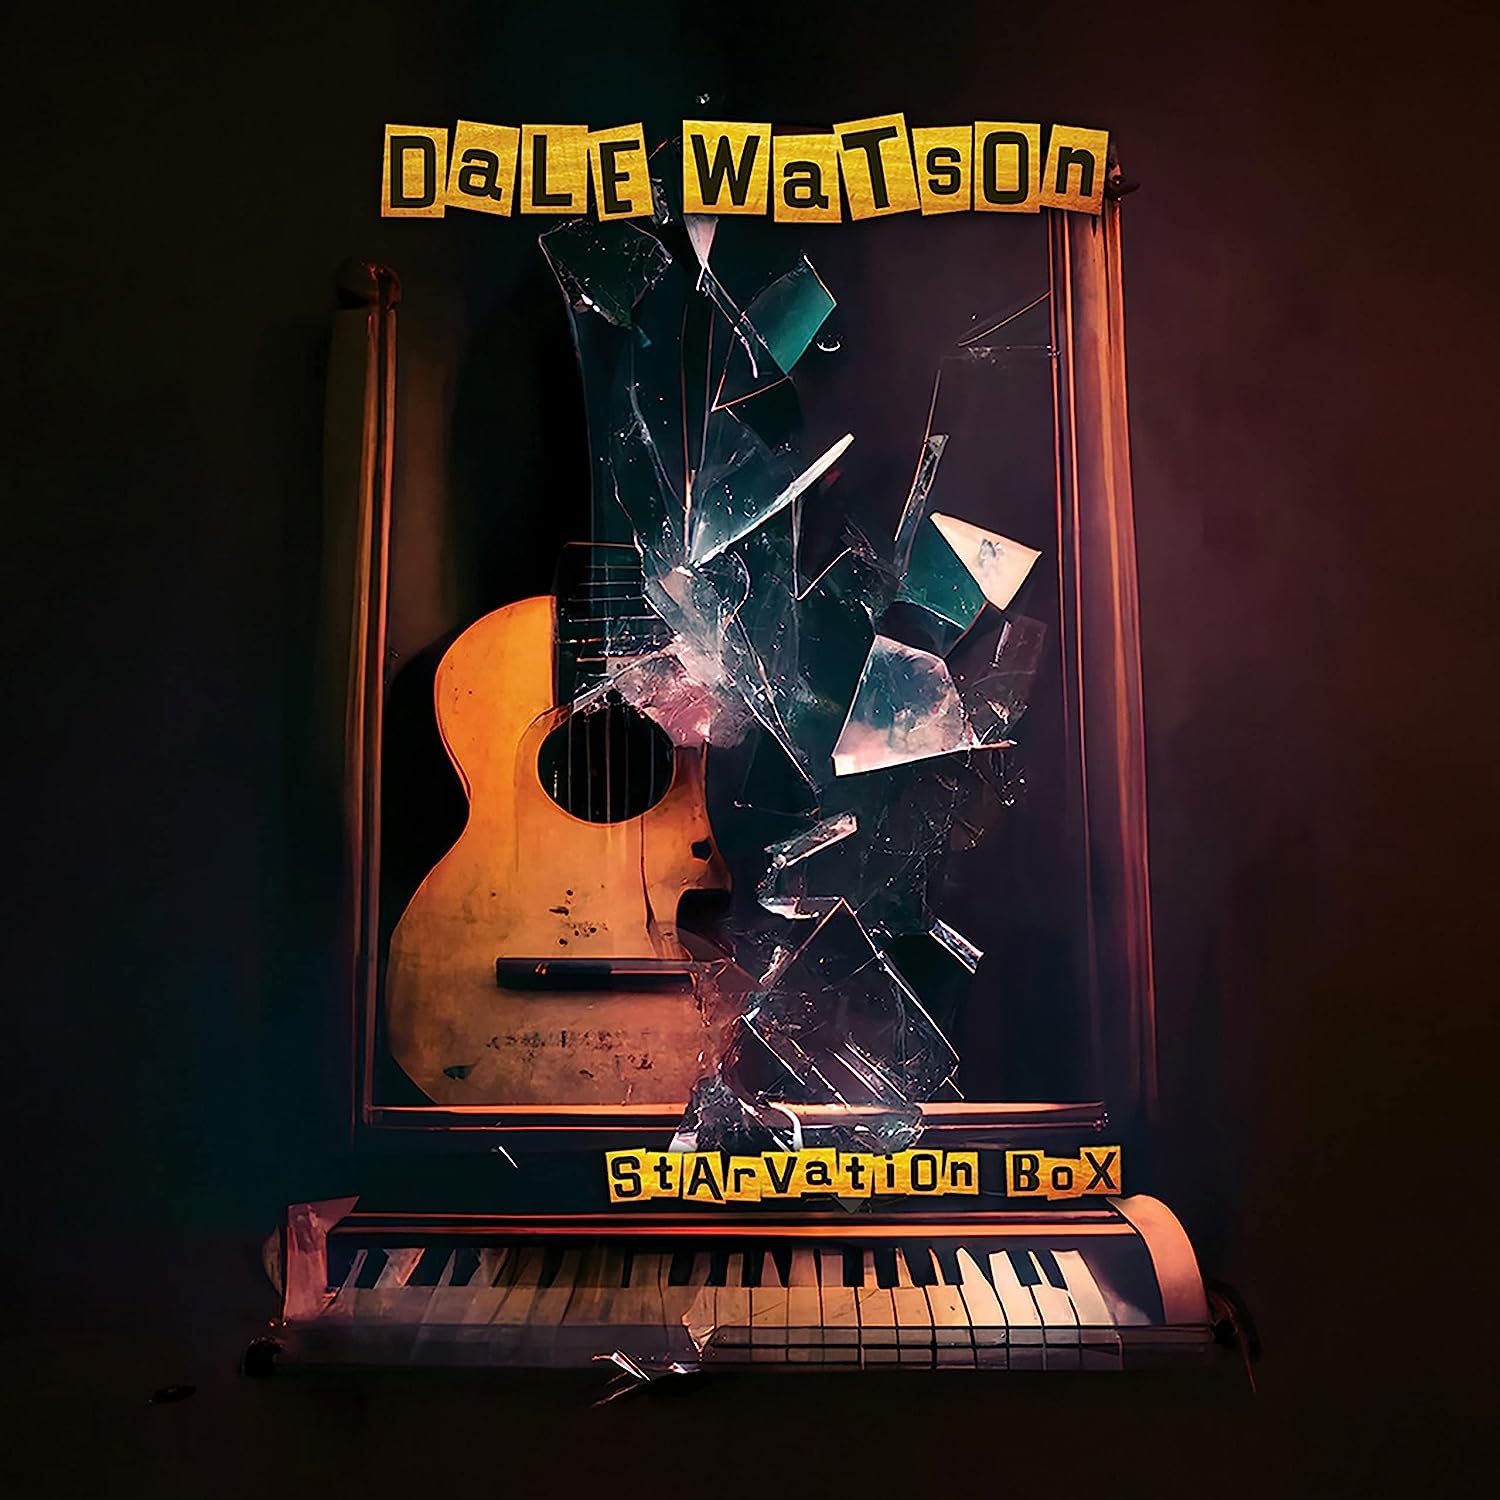 DALE WATSON Strips Down To His Roots On Brand New Acoustic Album STARVATION BOX, Shares Title Track As First Single